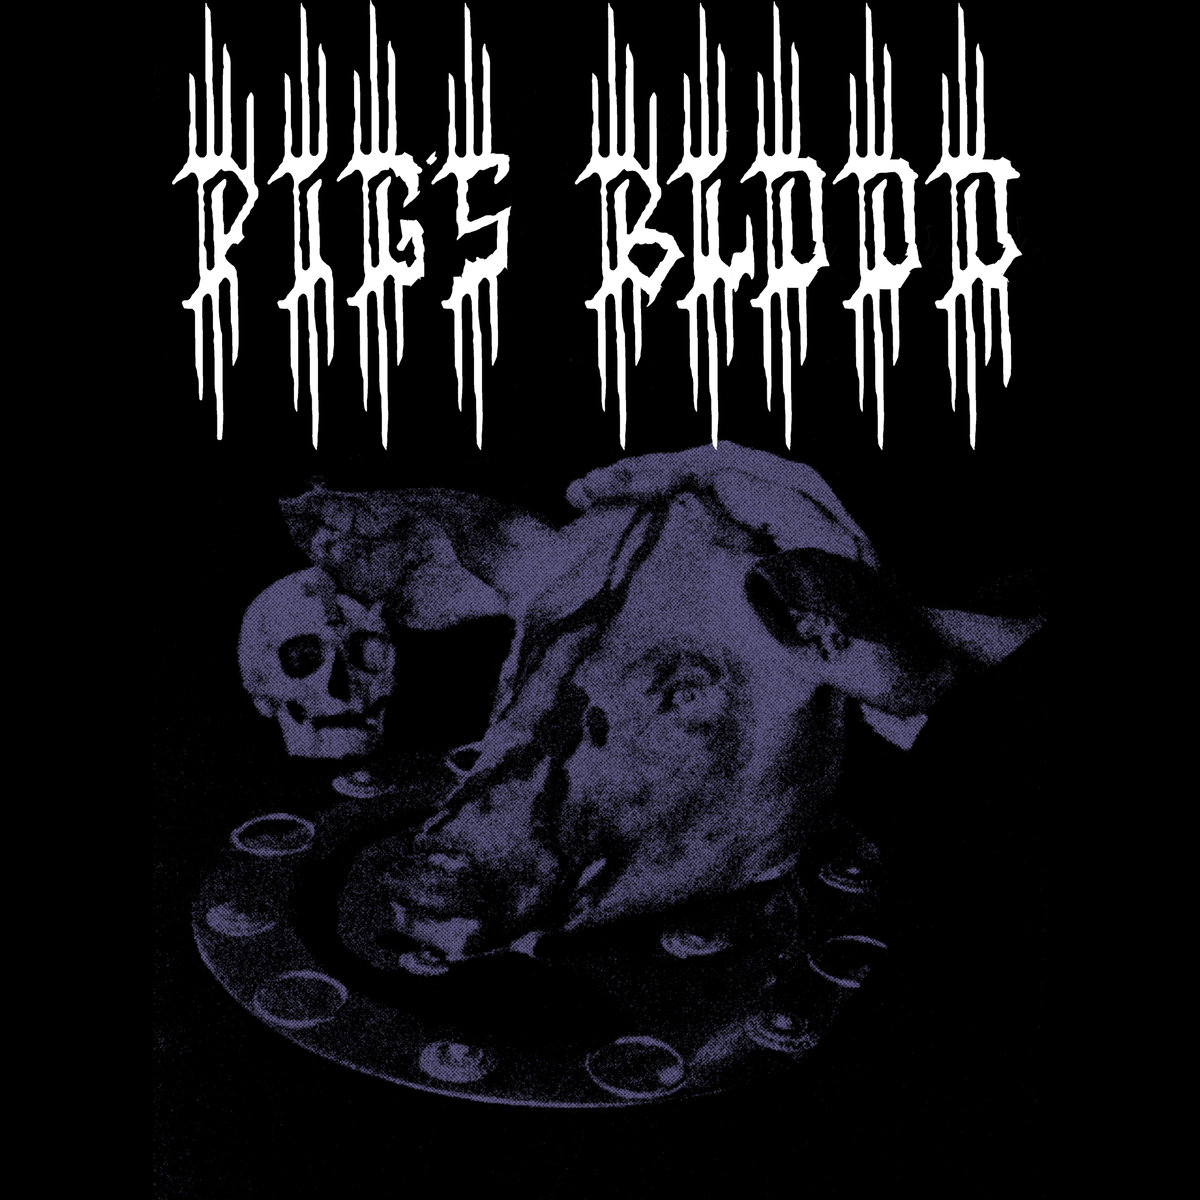 PIG'S BLOOD - Demo cover 